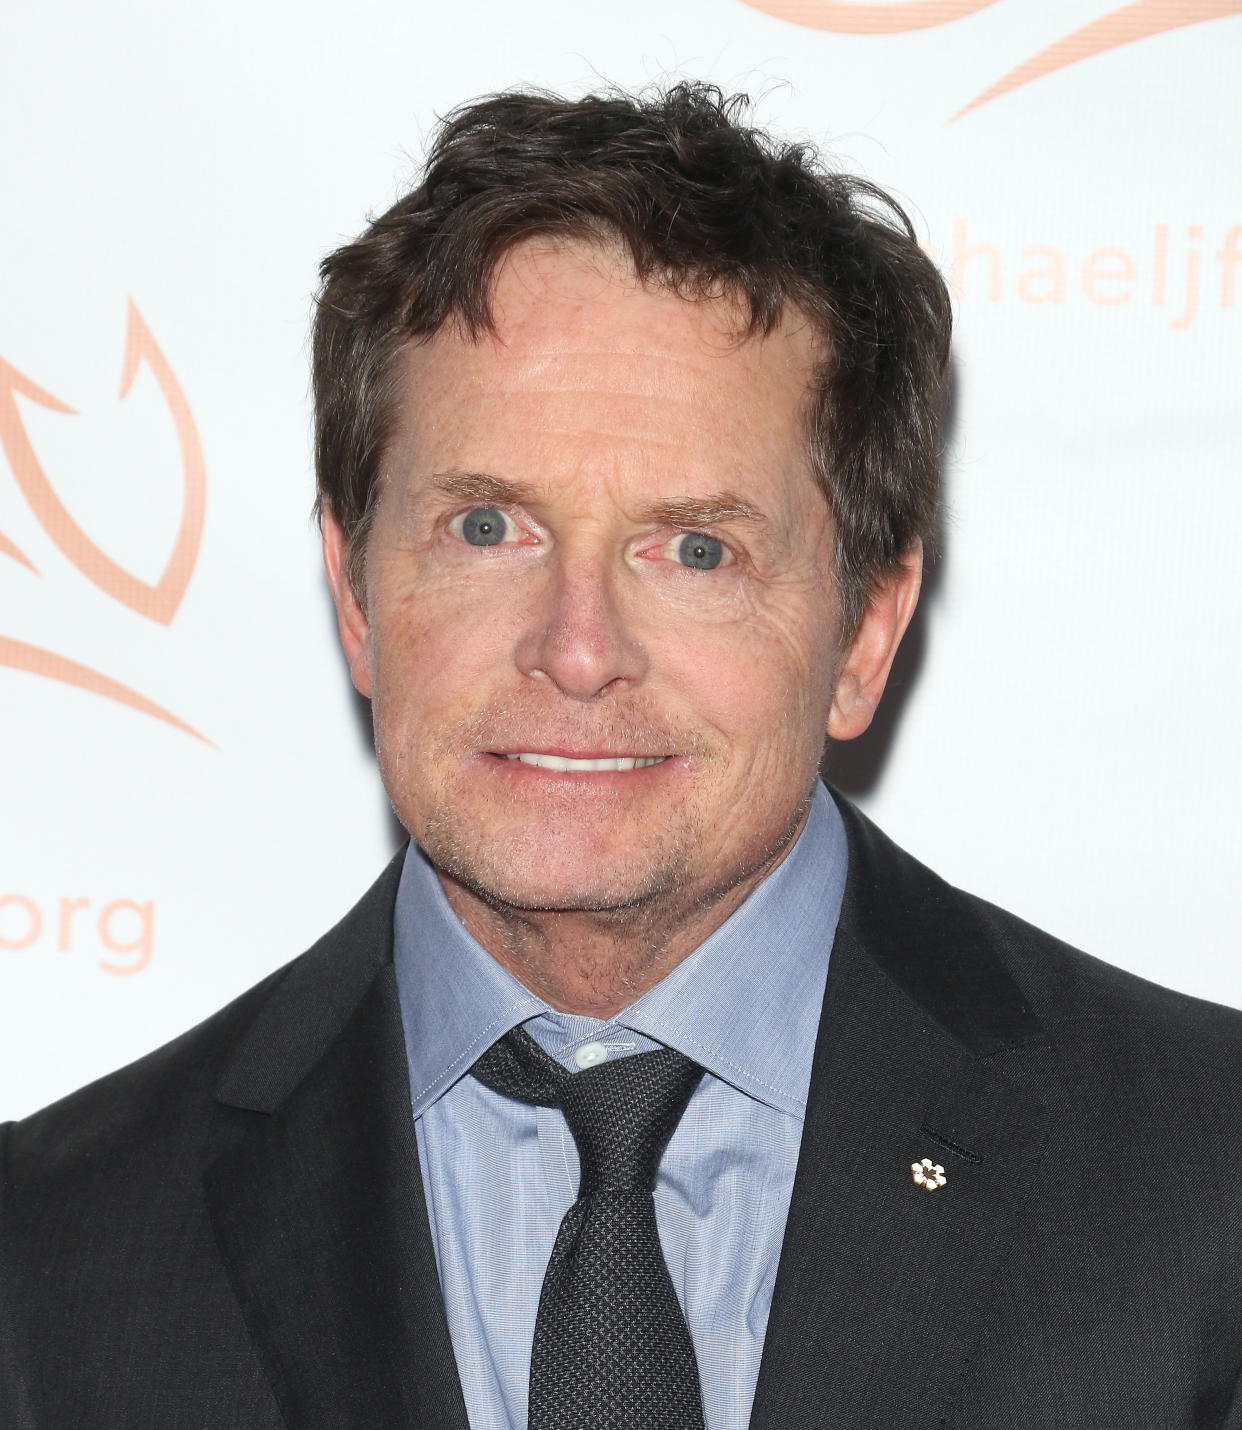 Michael J. Fox reflects on President Donald Trump and his Parkinson's diagnosis in a new interview. (Photo: Jim Spellman/WireImage)